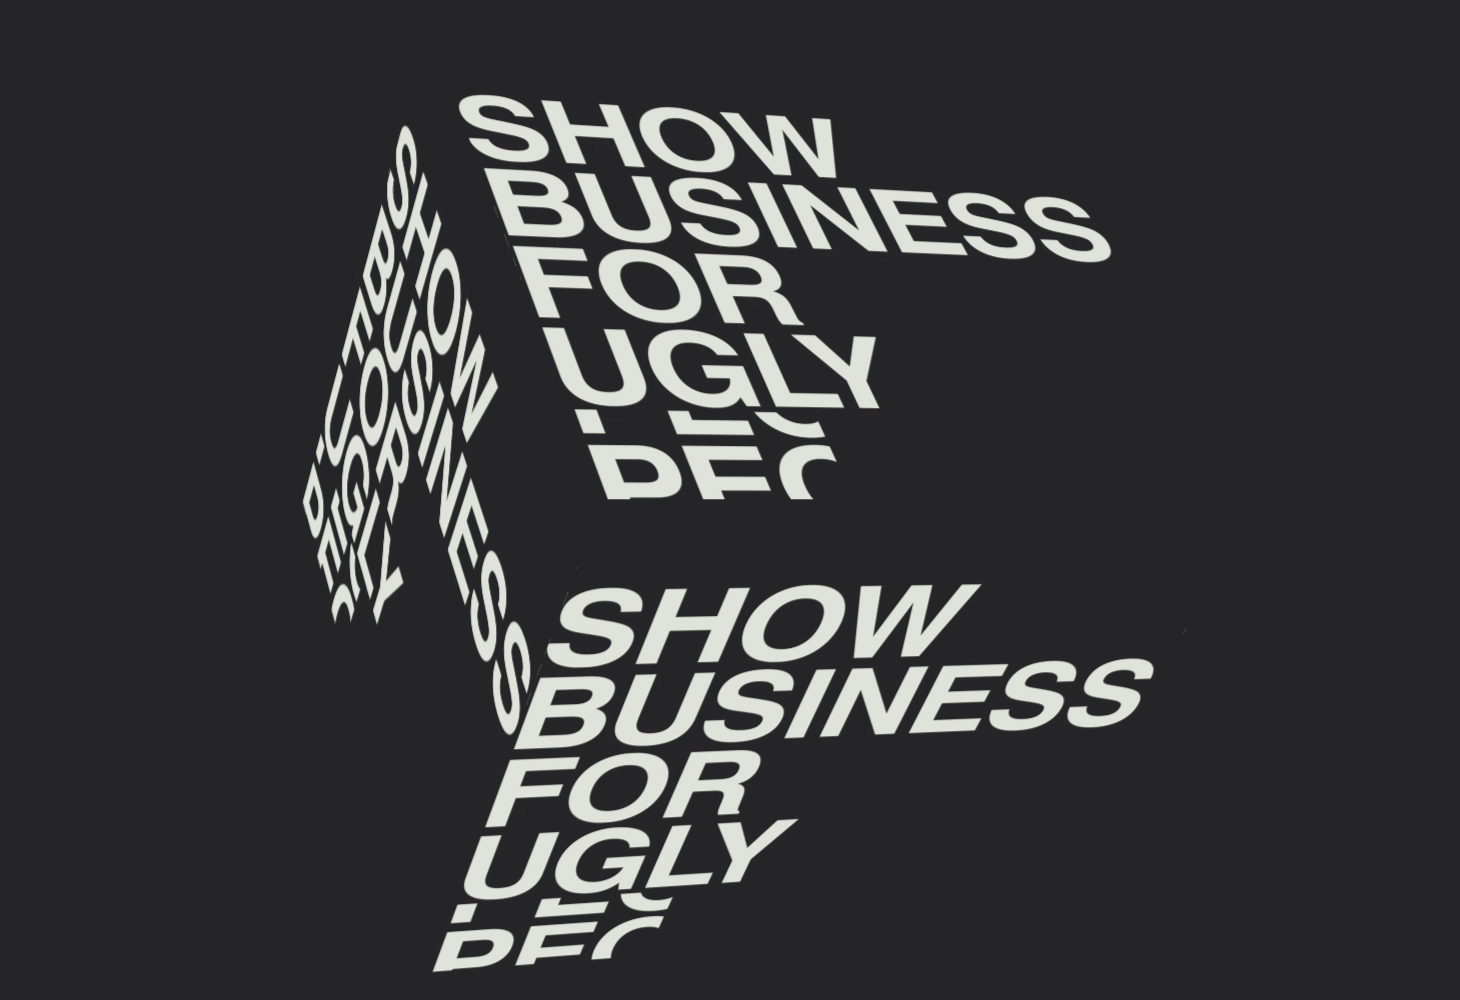 Show business for ugly